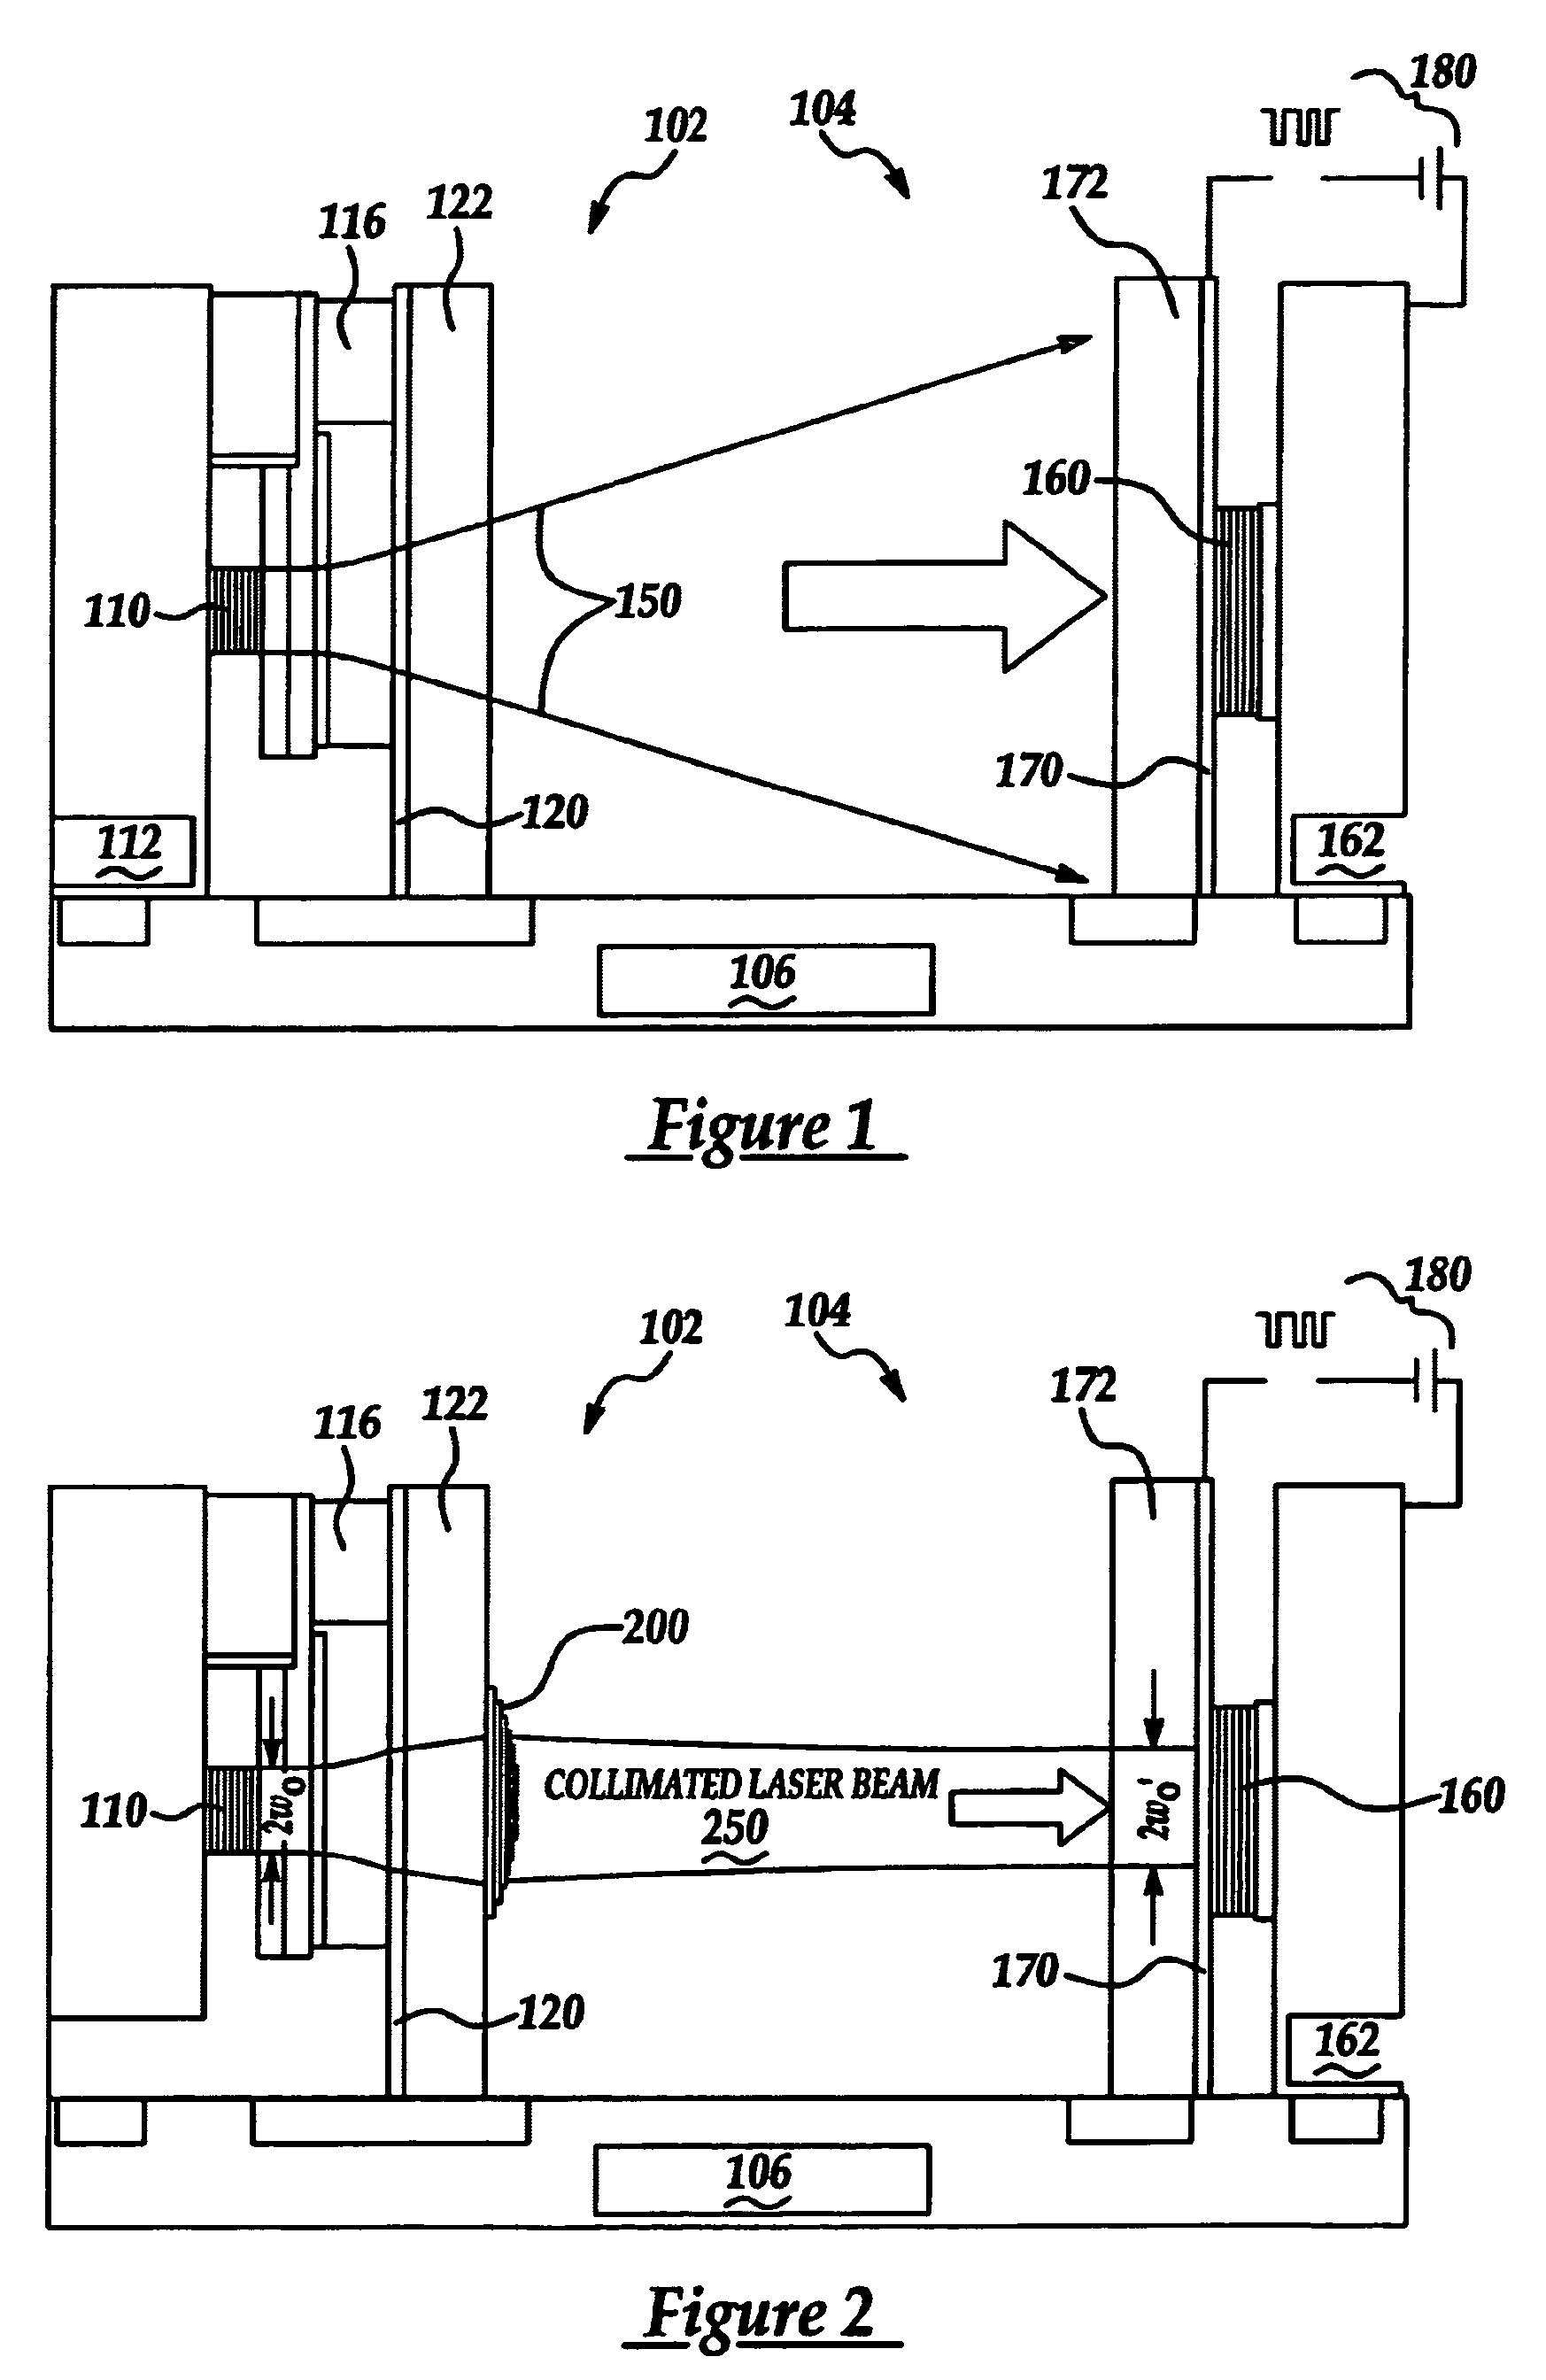 Optical transmitters and interconnects using surface-emitting lasers and micro-optical elements